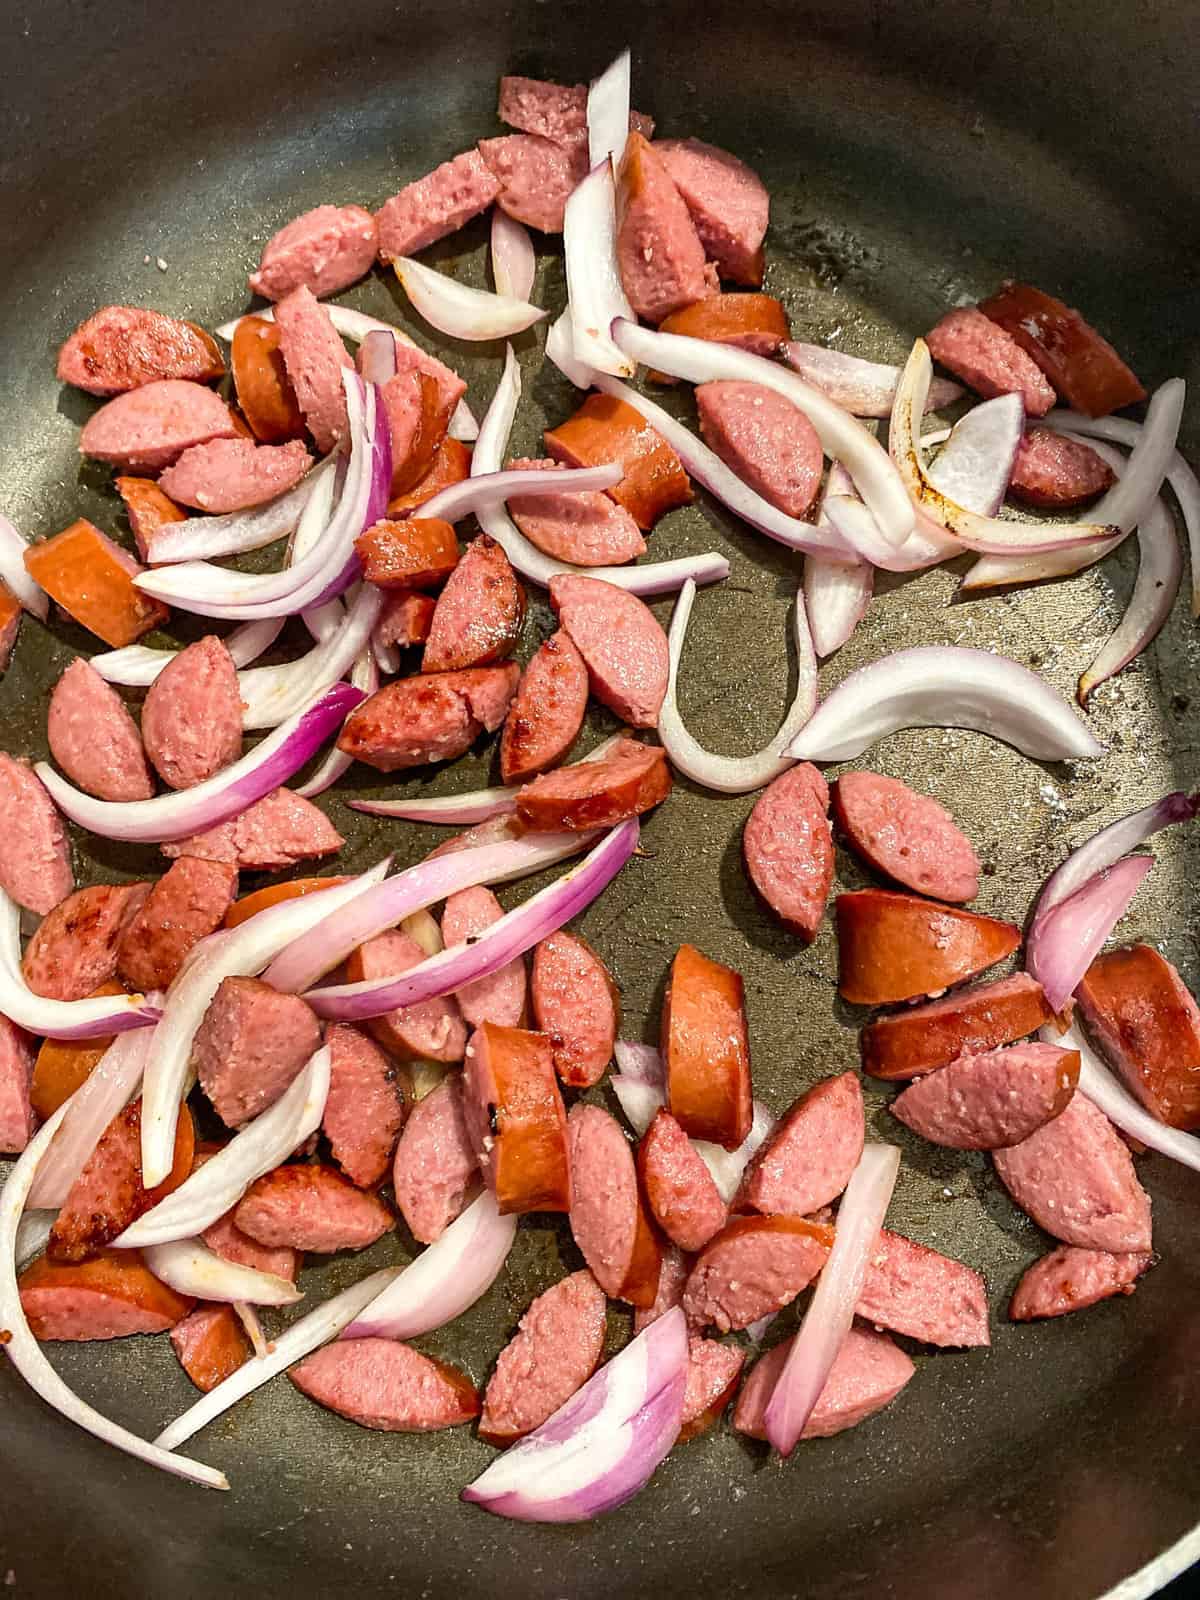 frying beef sausage and onions in a skillet to make fried cabbage